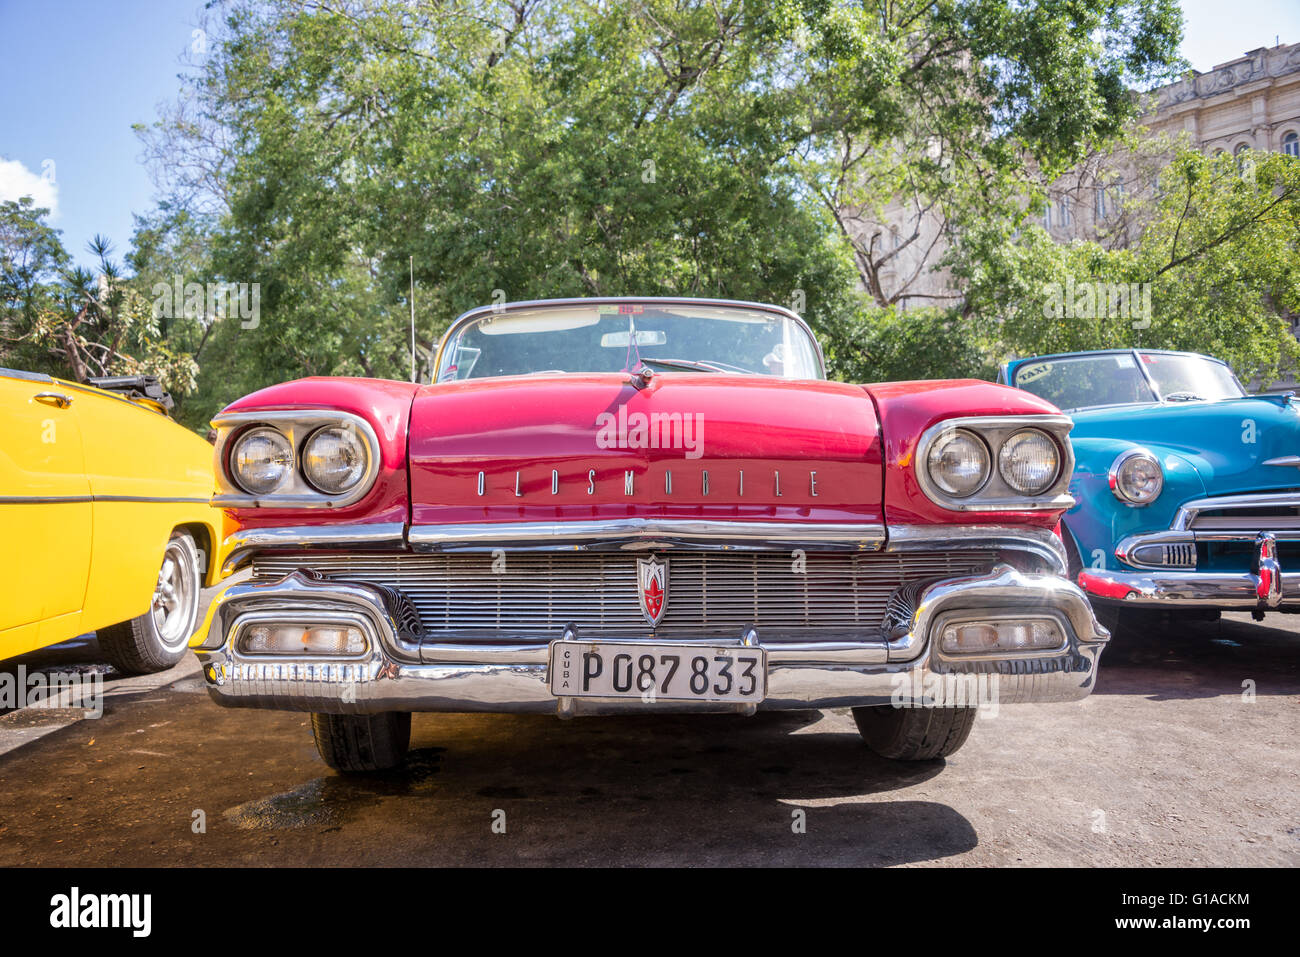 HAVANA, CUBA - APRIL 18: Front of of a red classic american Oldsmobile car, on April 18, 2016 in Havana Stock Photo